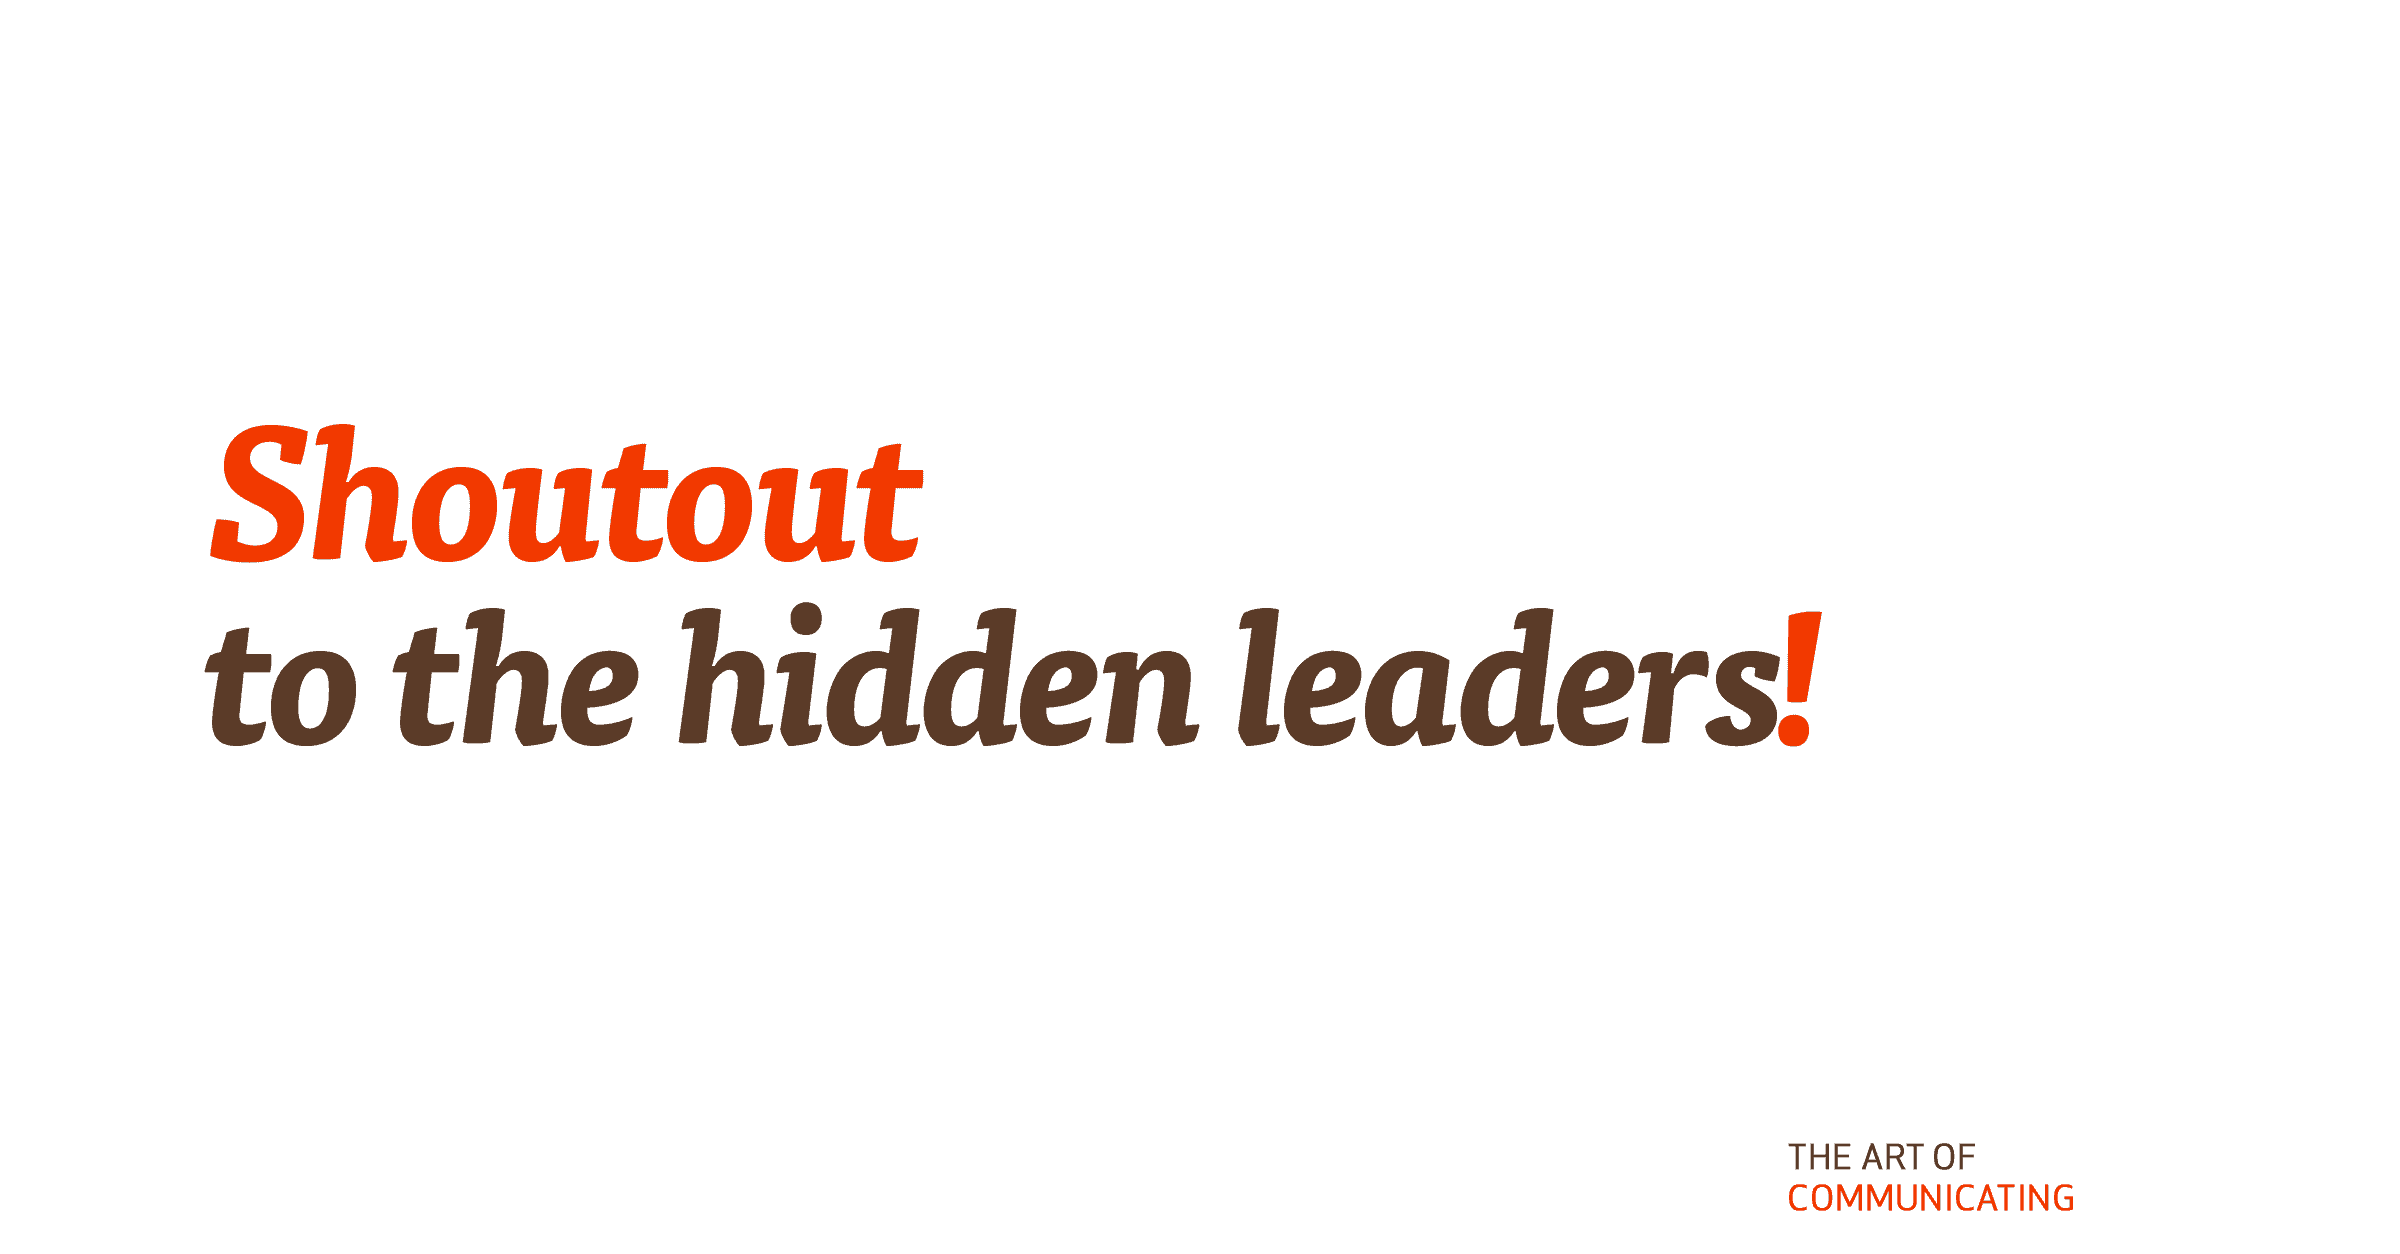 Shoutout to the hidden leaders